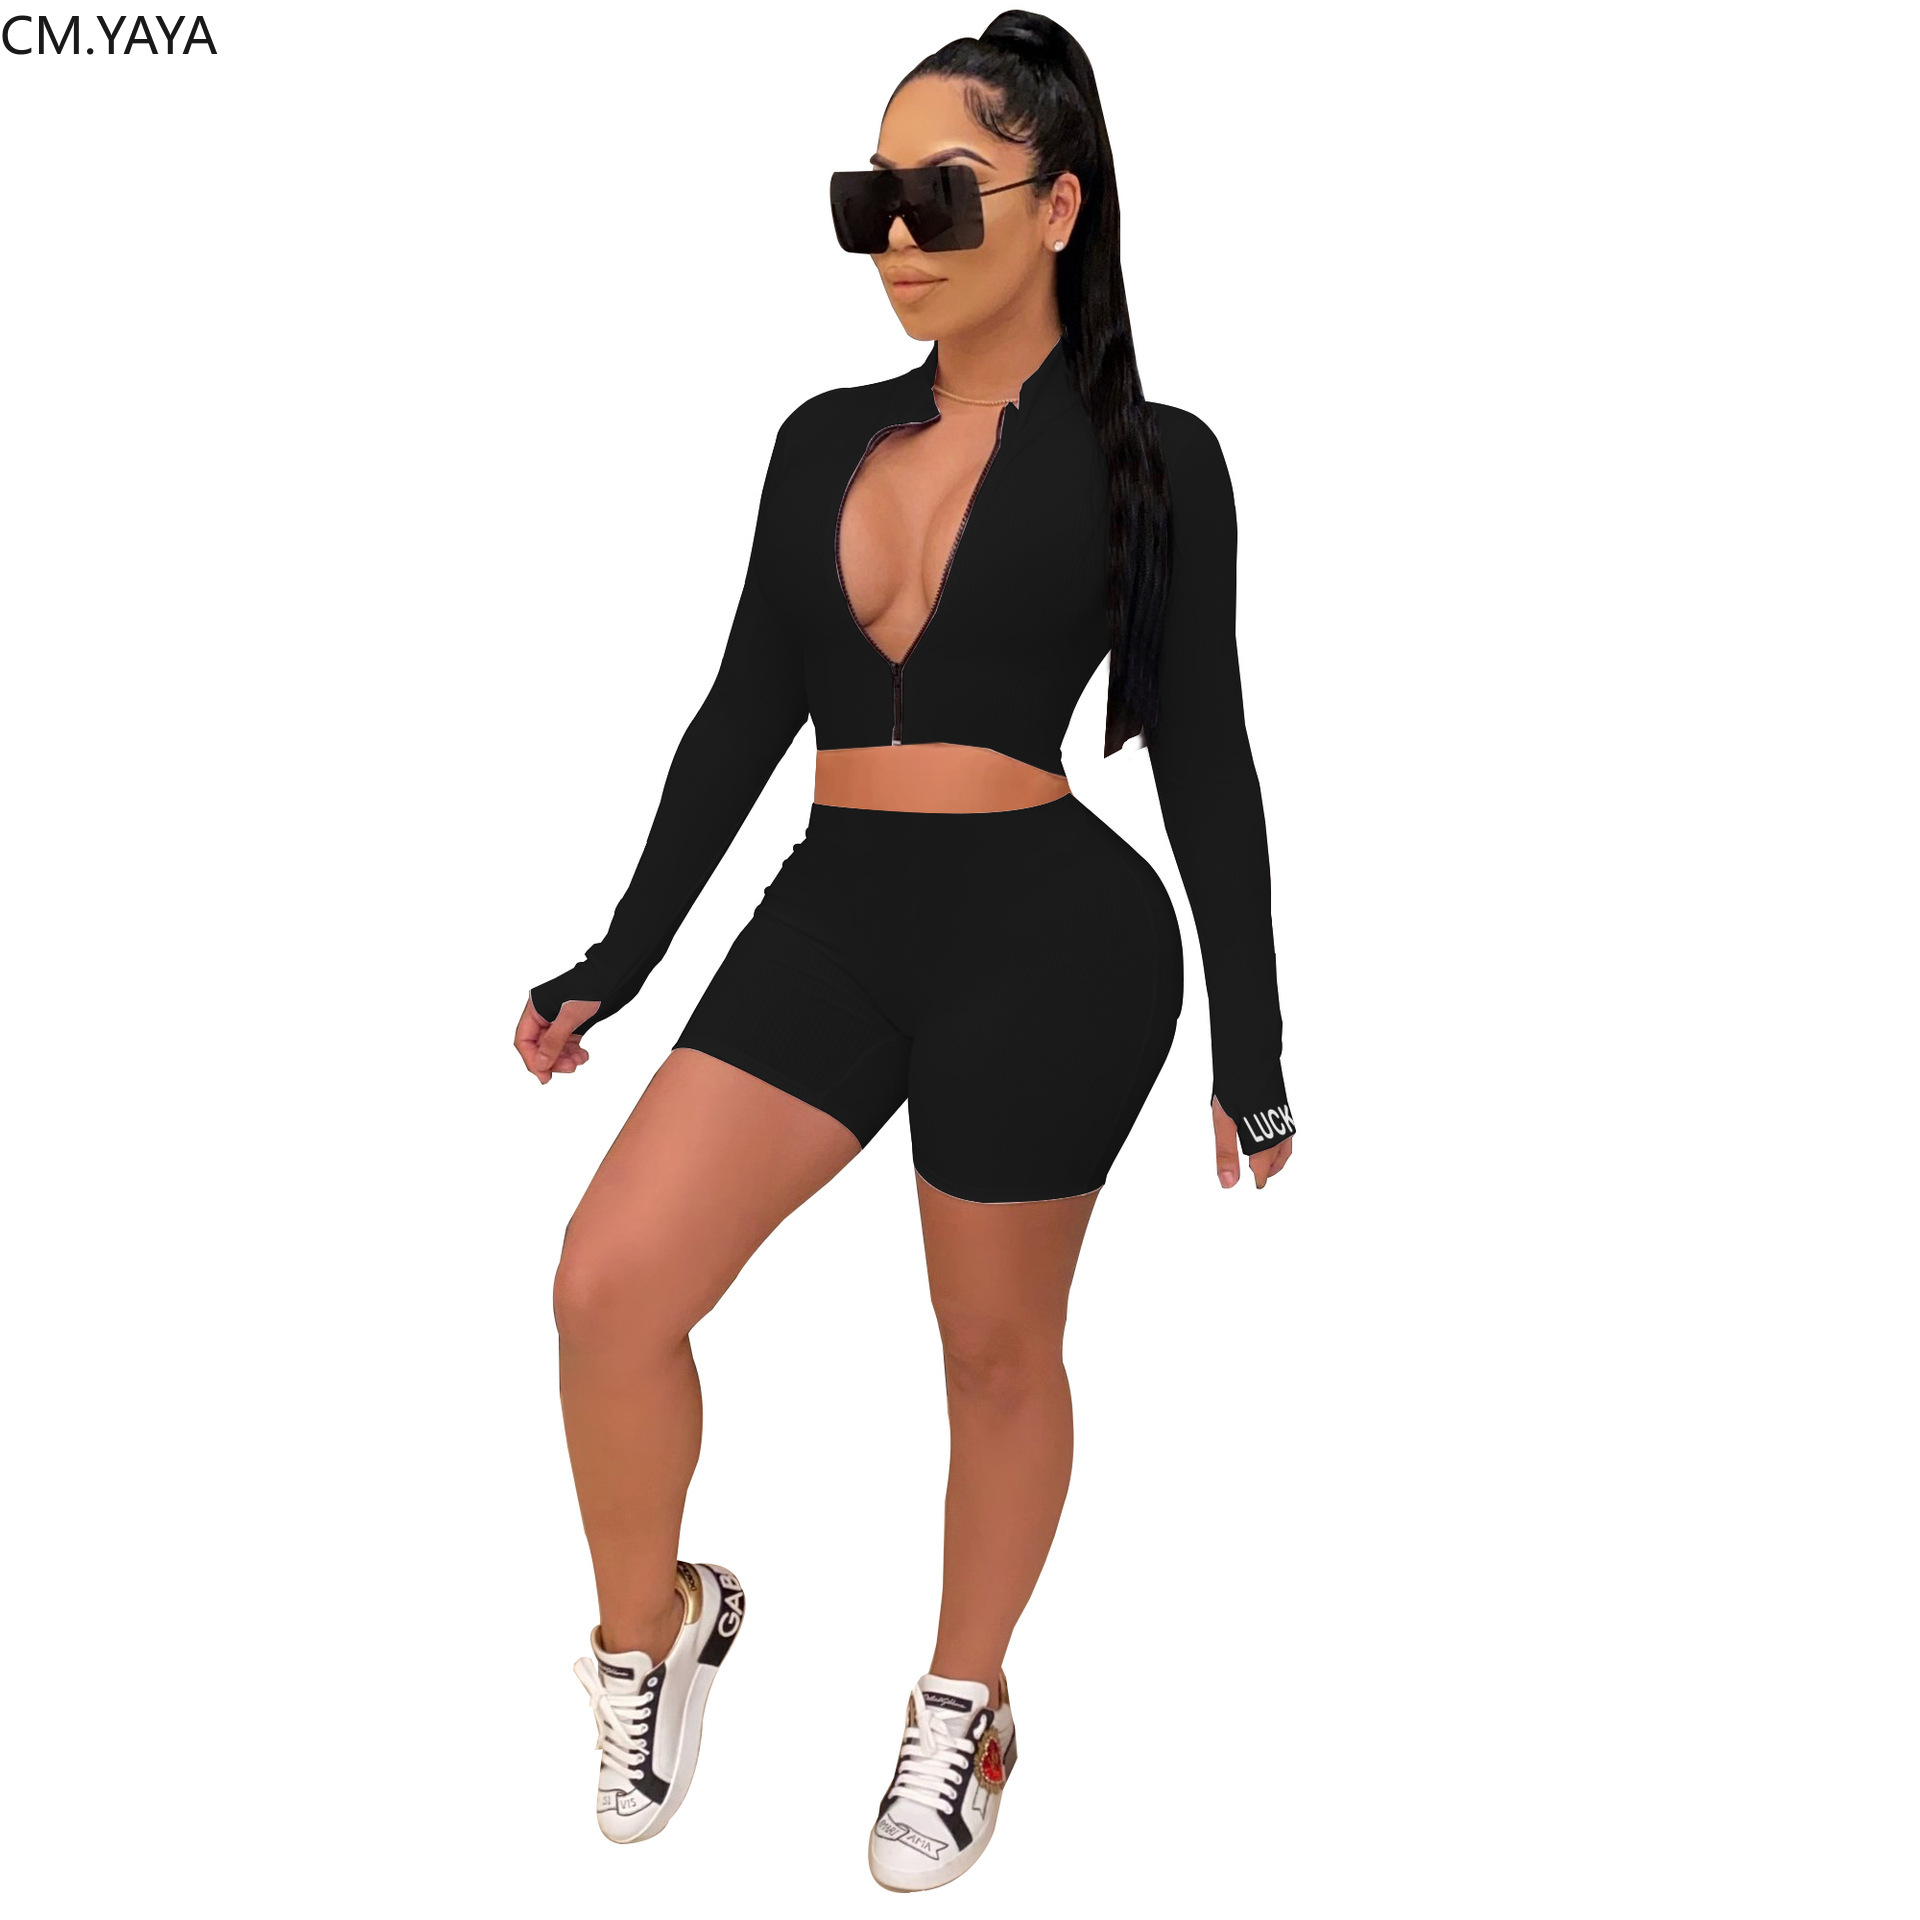 CM.YAYA Sportwear Knitted Ribbed Lucky Embroidery Long Sleeve Zipper Women's Set Tops Shorts Pants Suit Tracksuit Matching Set